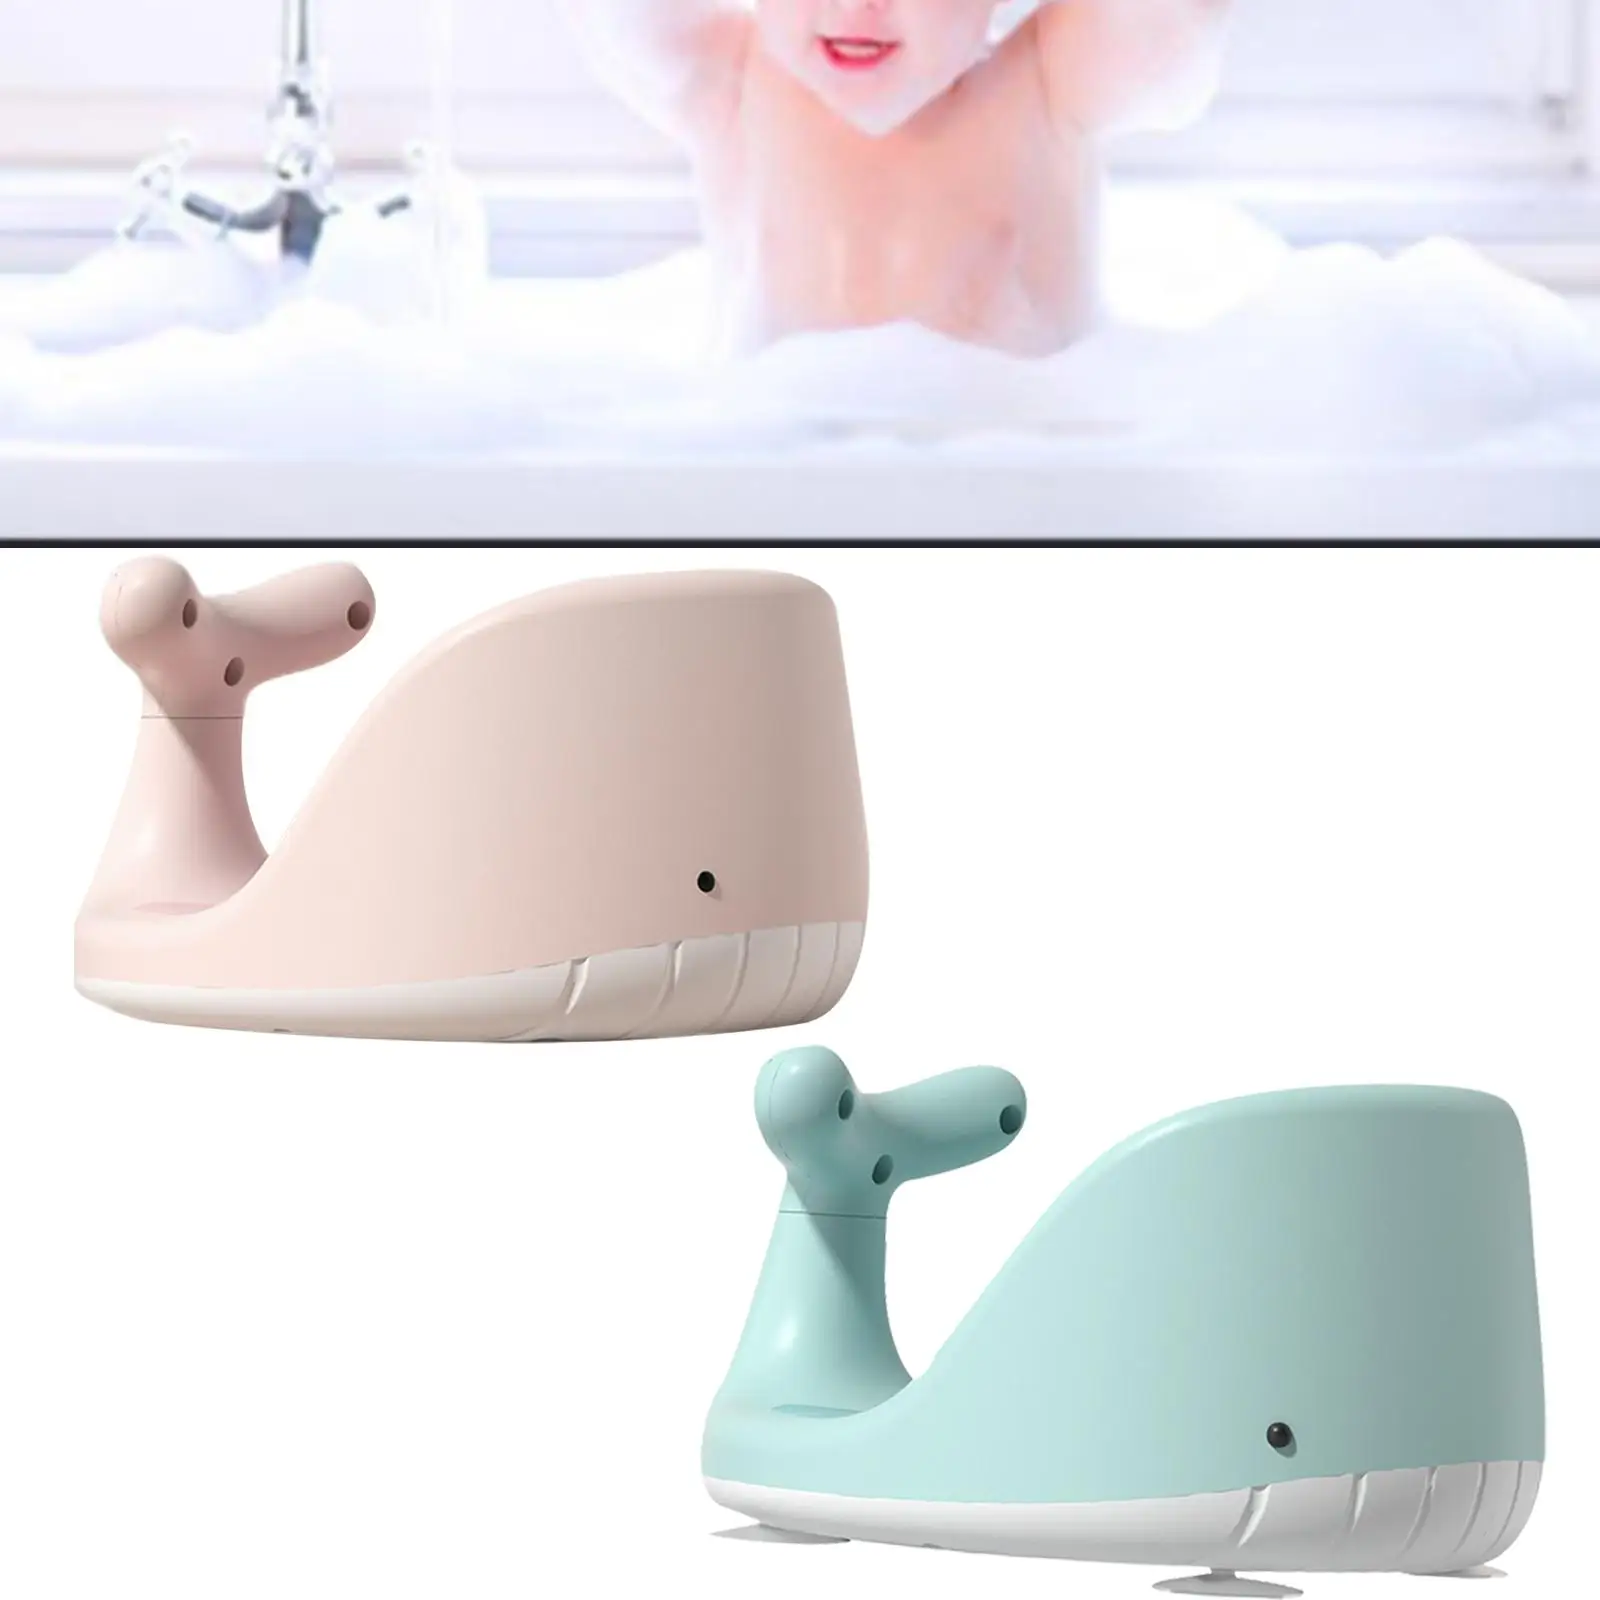 Baby Suction Cup Bath Seat shower seats Stability shower seats Backrest for Infant baby Bathing Accessories